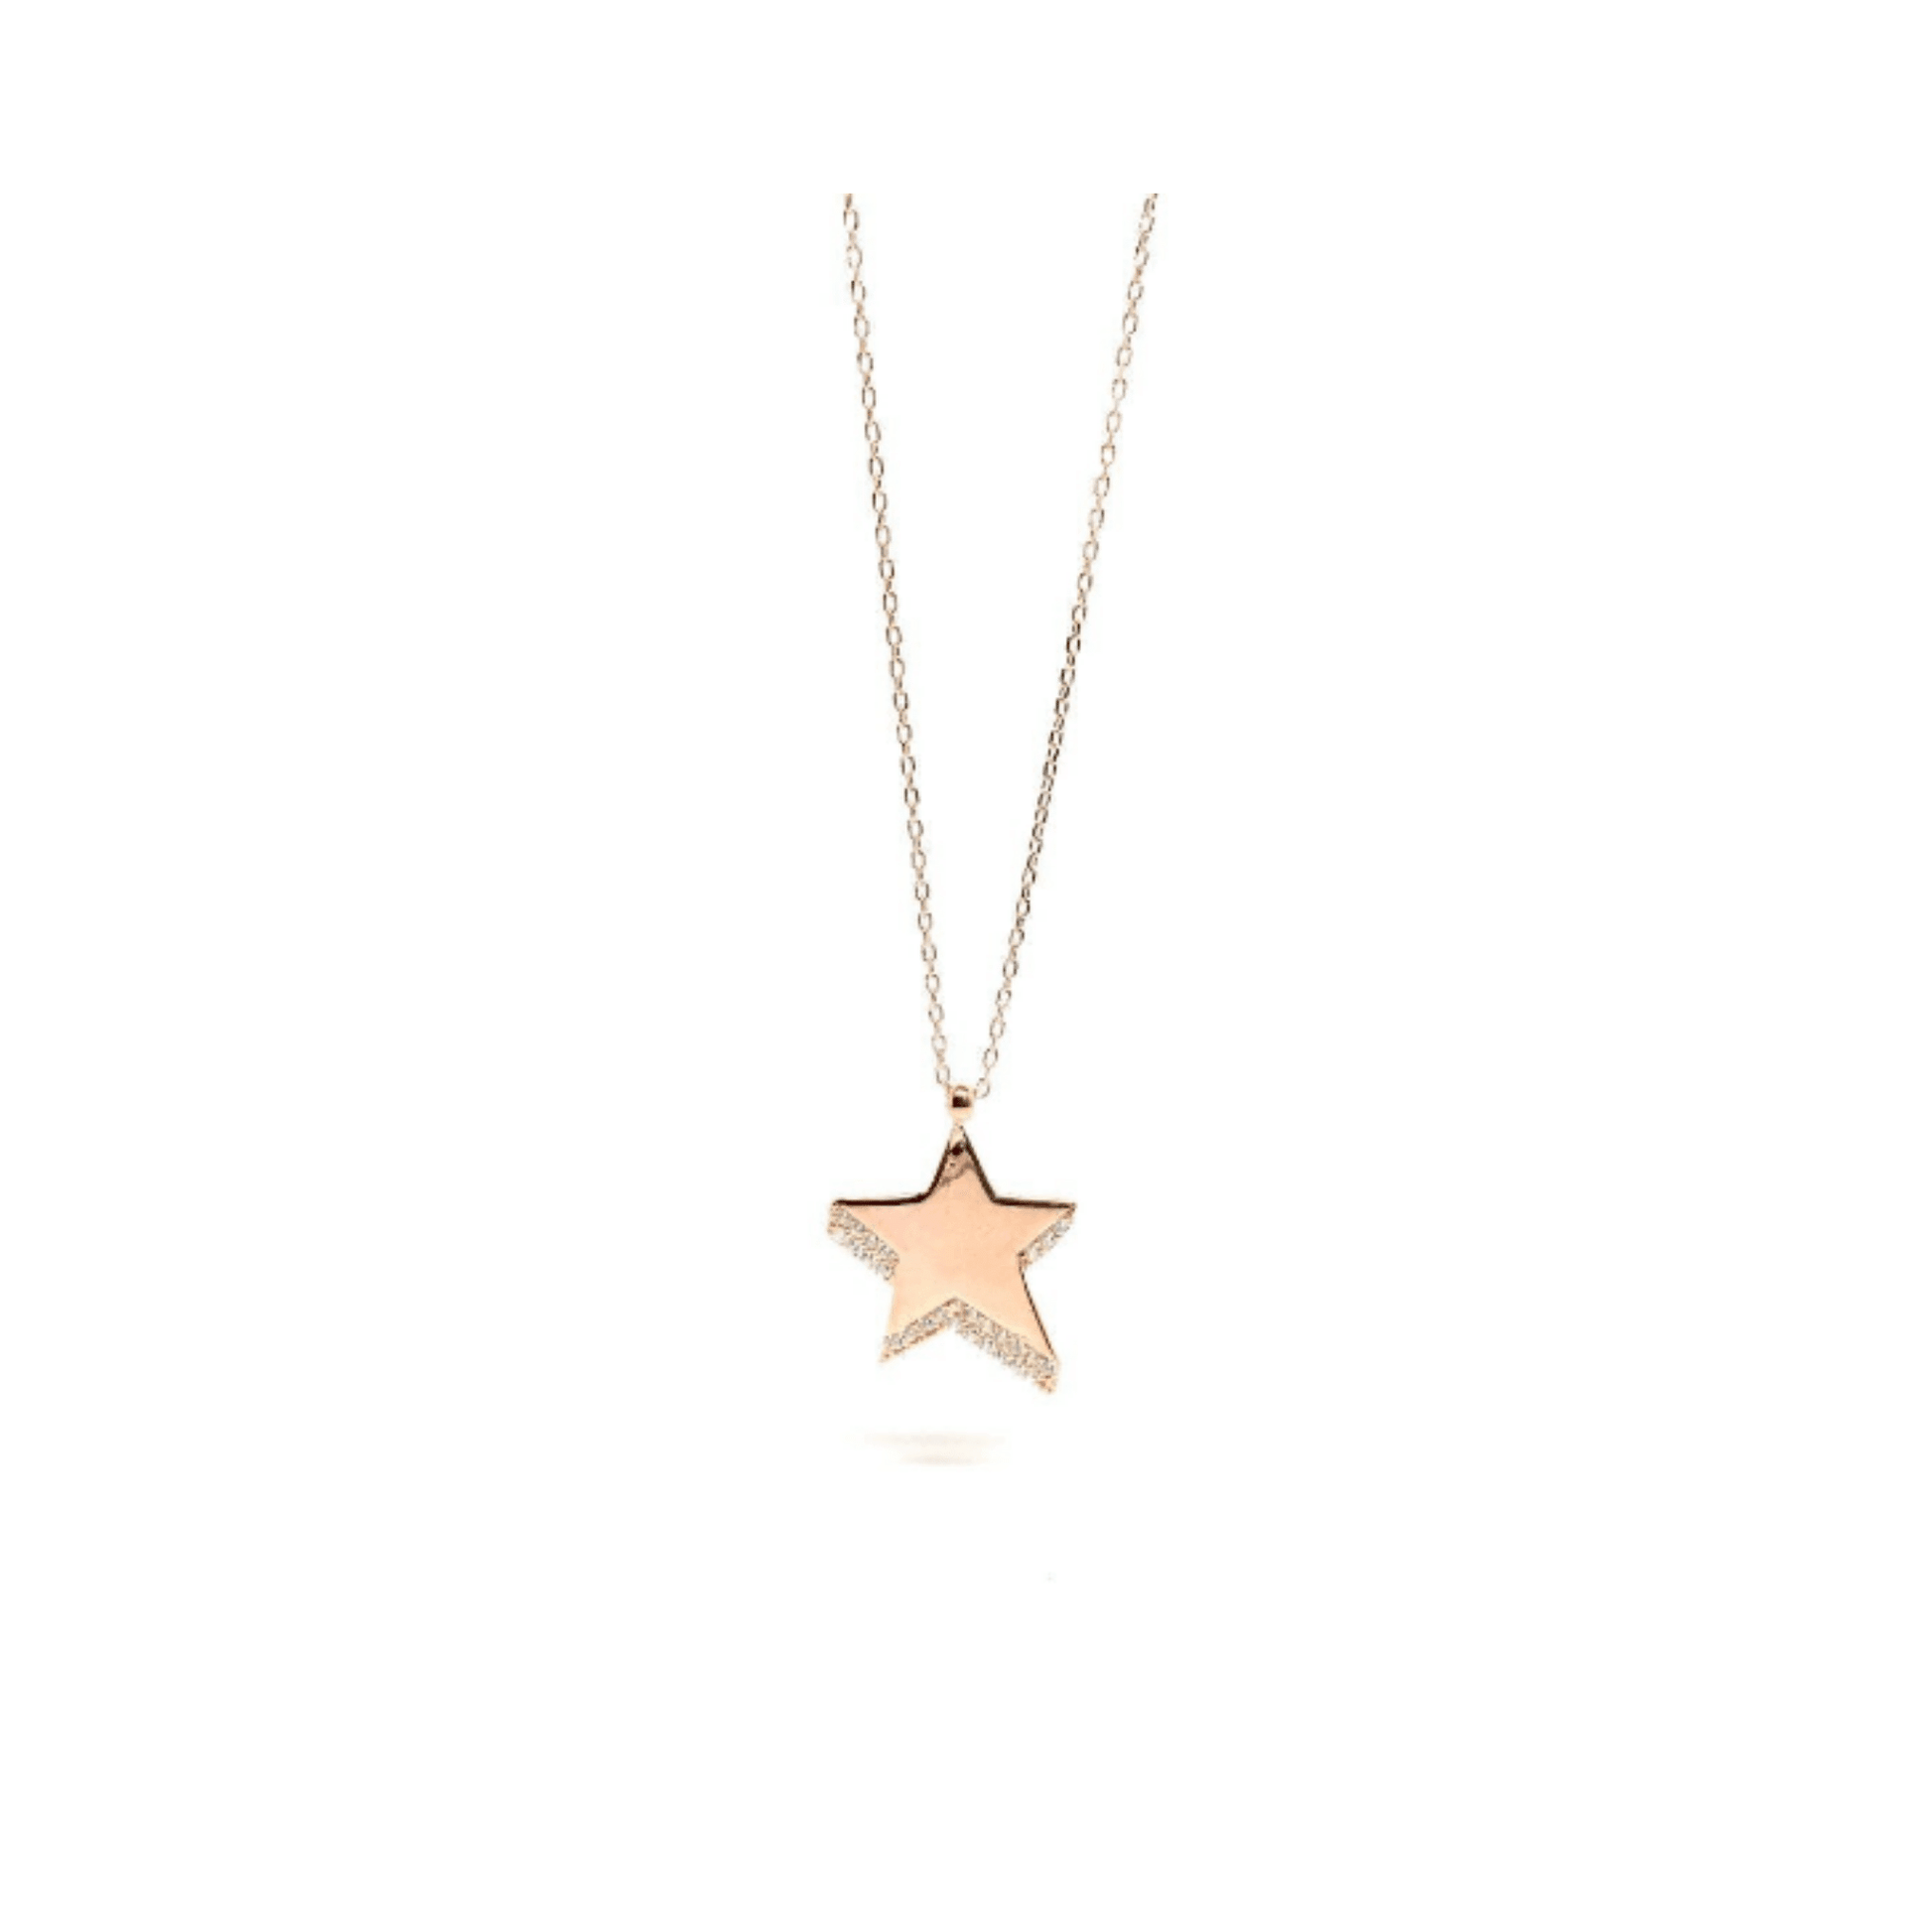 Star Necklace with Crystals, 925 Sterling Silver Necklace, Rose Gold Necklace - Naked Nation UK